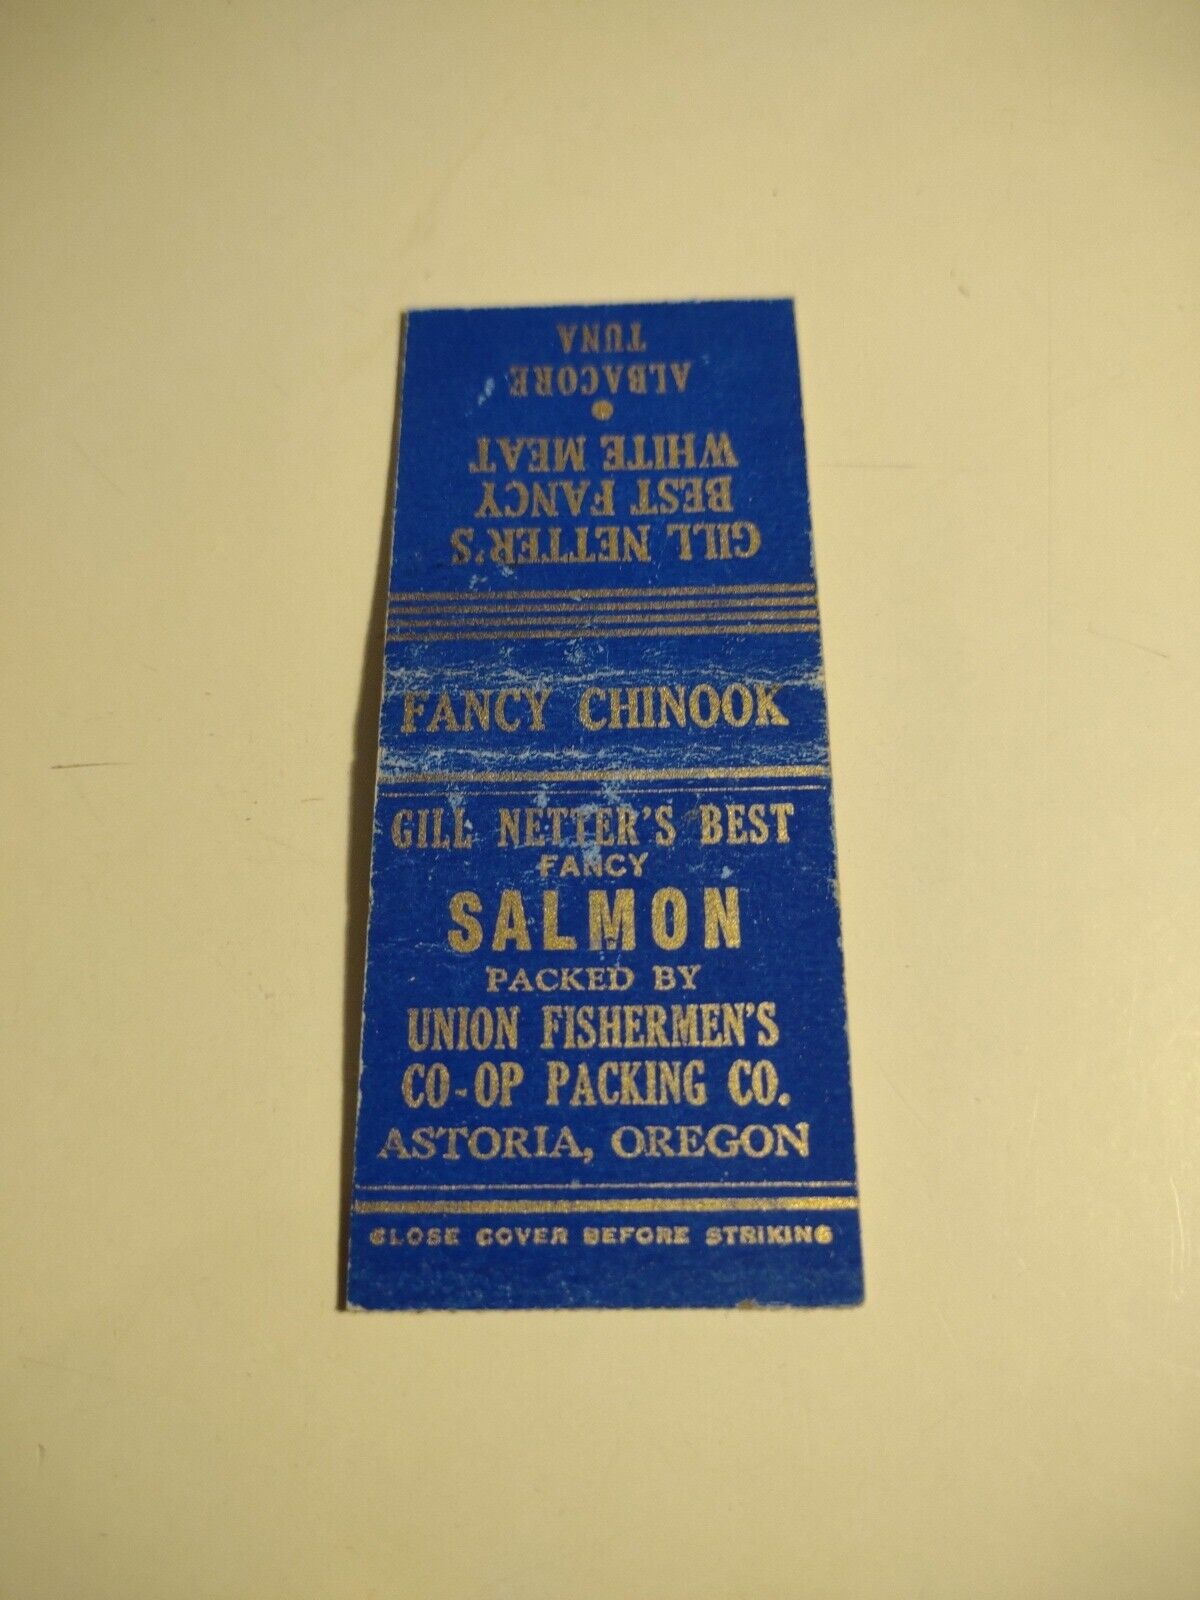 Vintage Union Fishermen\'s Co-Op Packing Co. Advertising Matchbook Cover Used